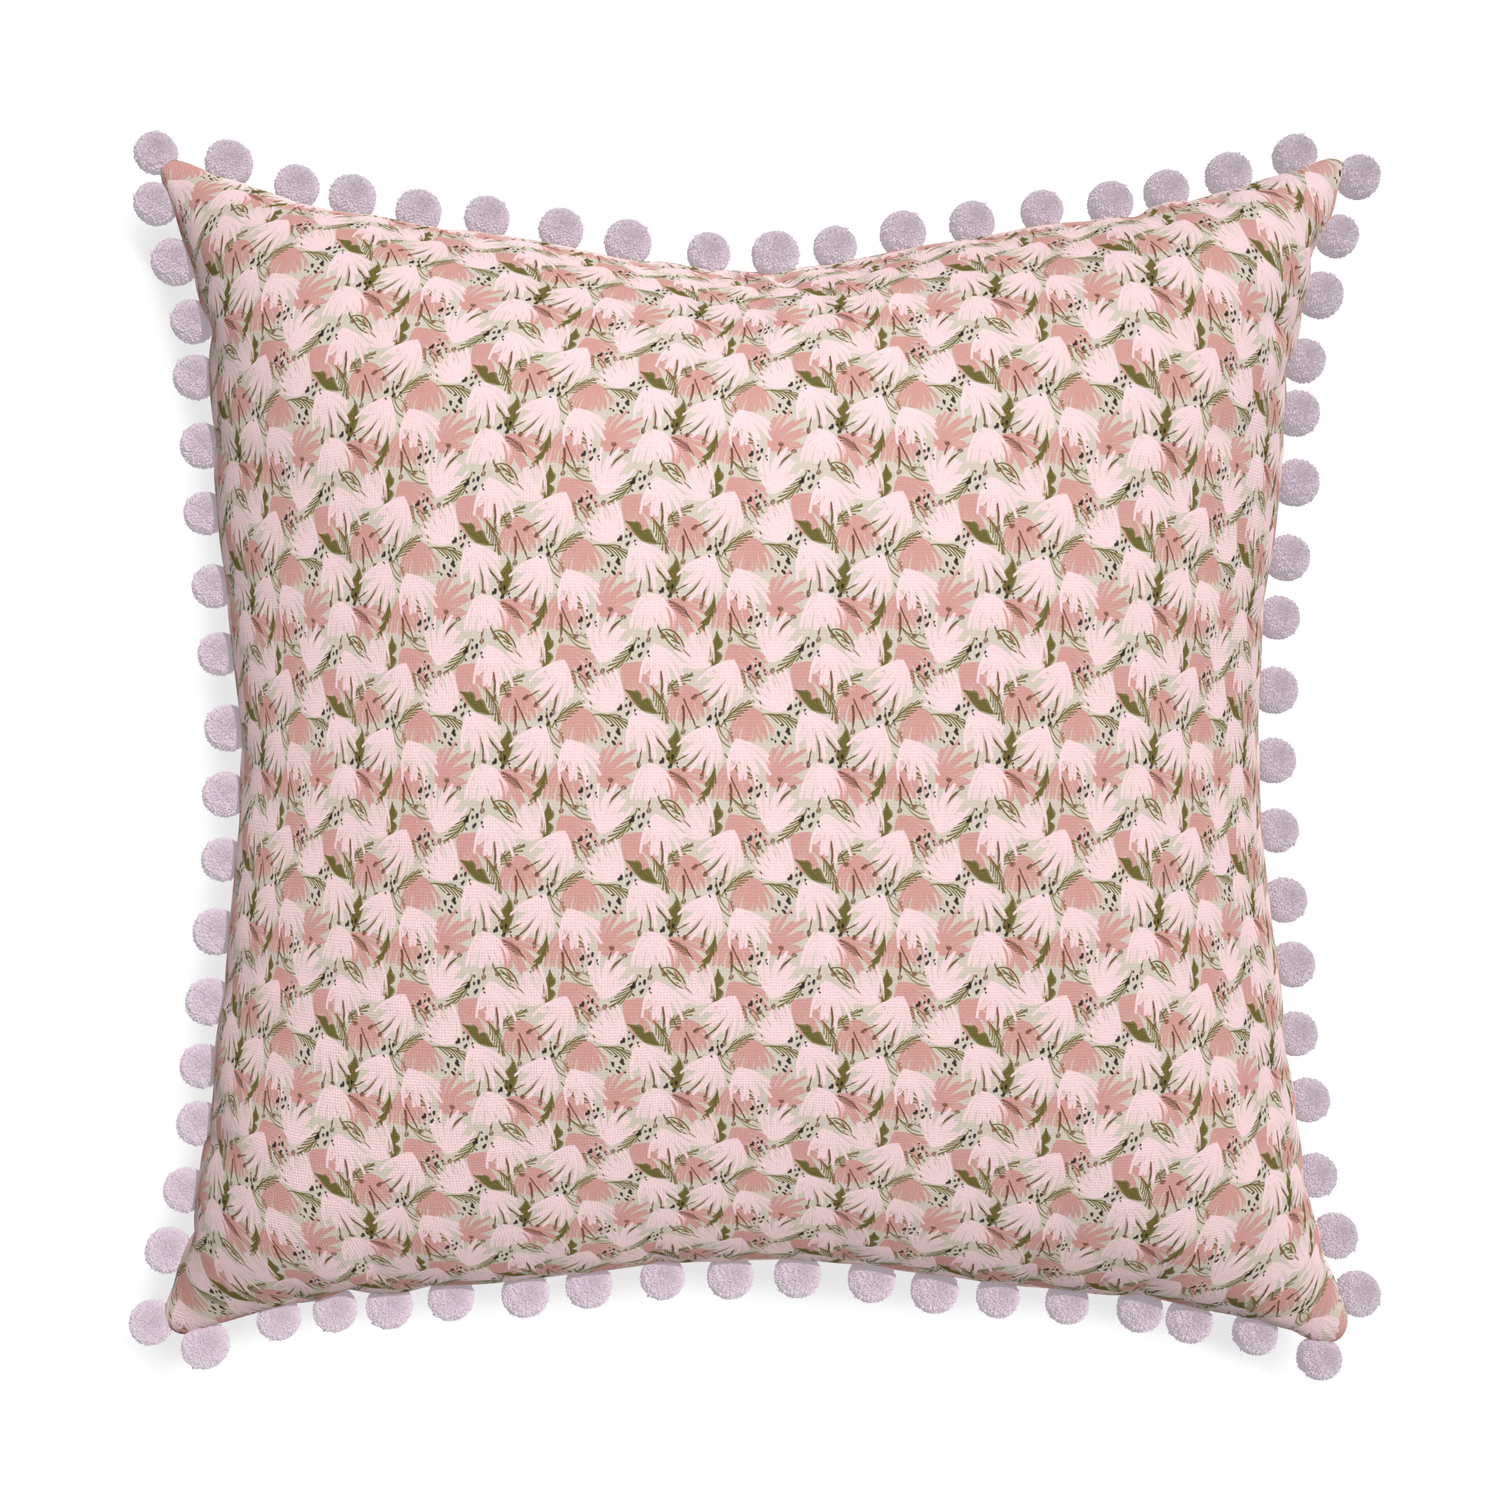 Euro-sham eden pink custom pink floralpillow with l on white background